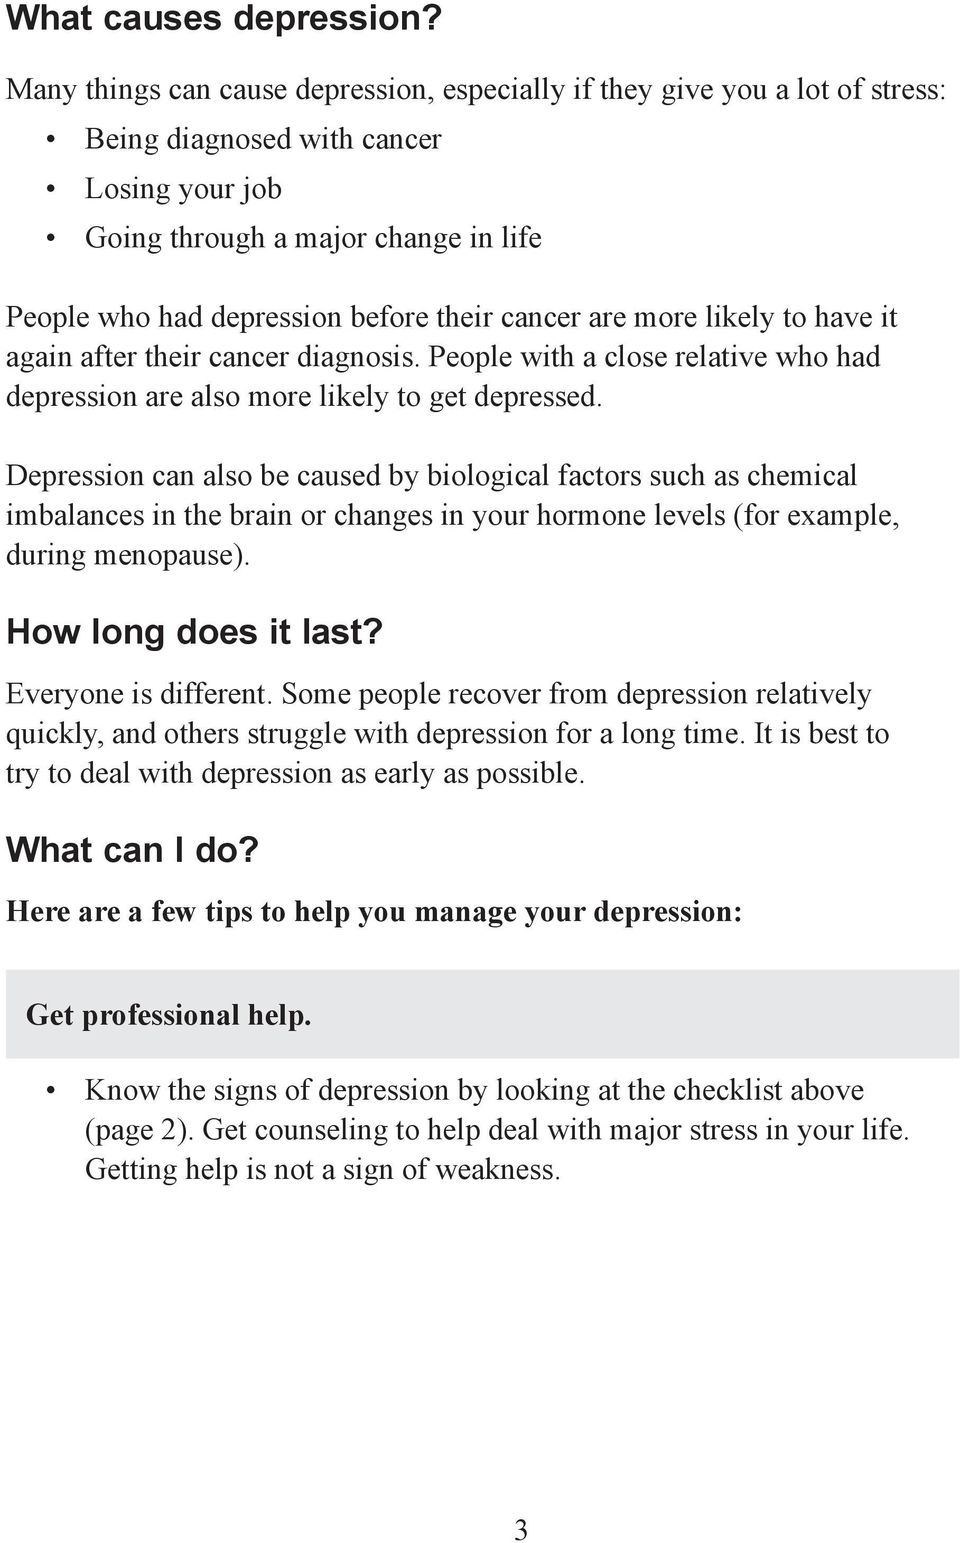 cancer are more likely to have it again after their cancer diagnosis. People with a close relative who had depression are also more likely to get depressed.